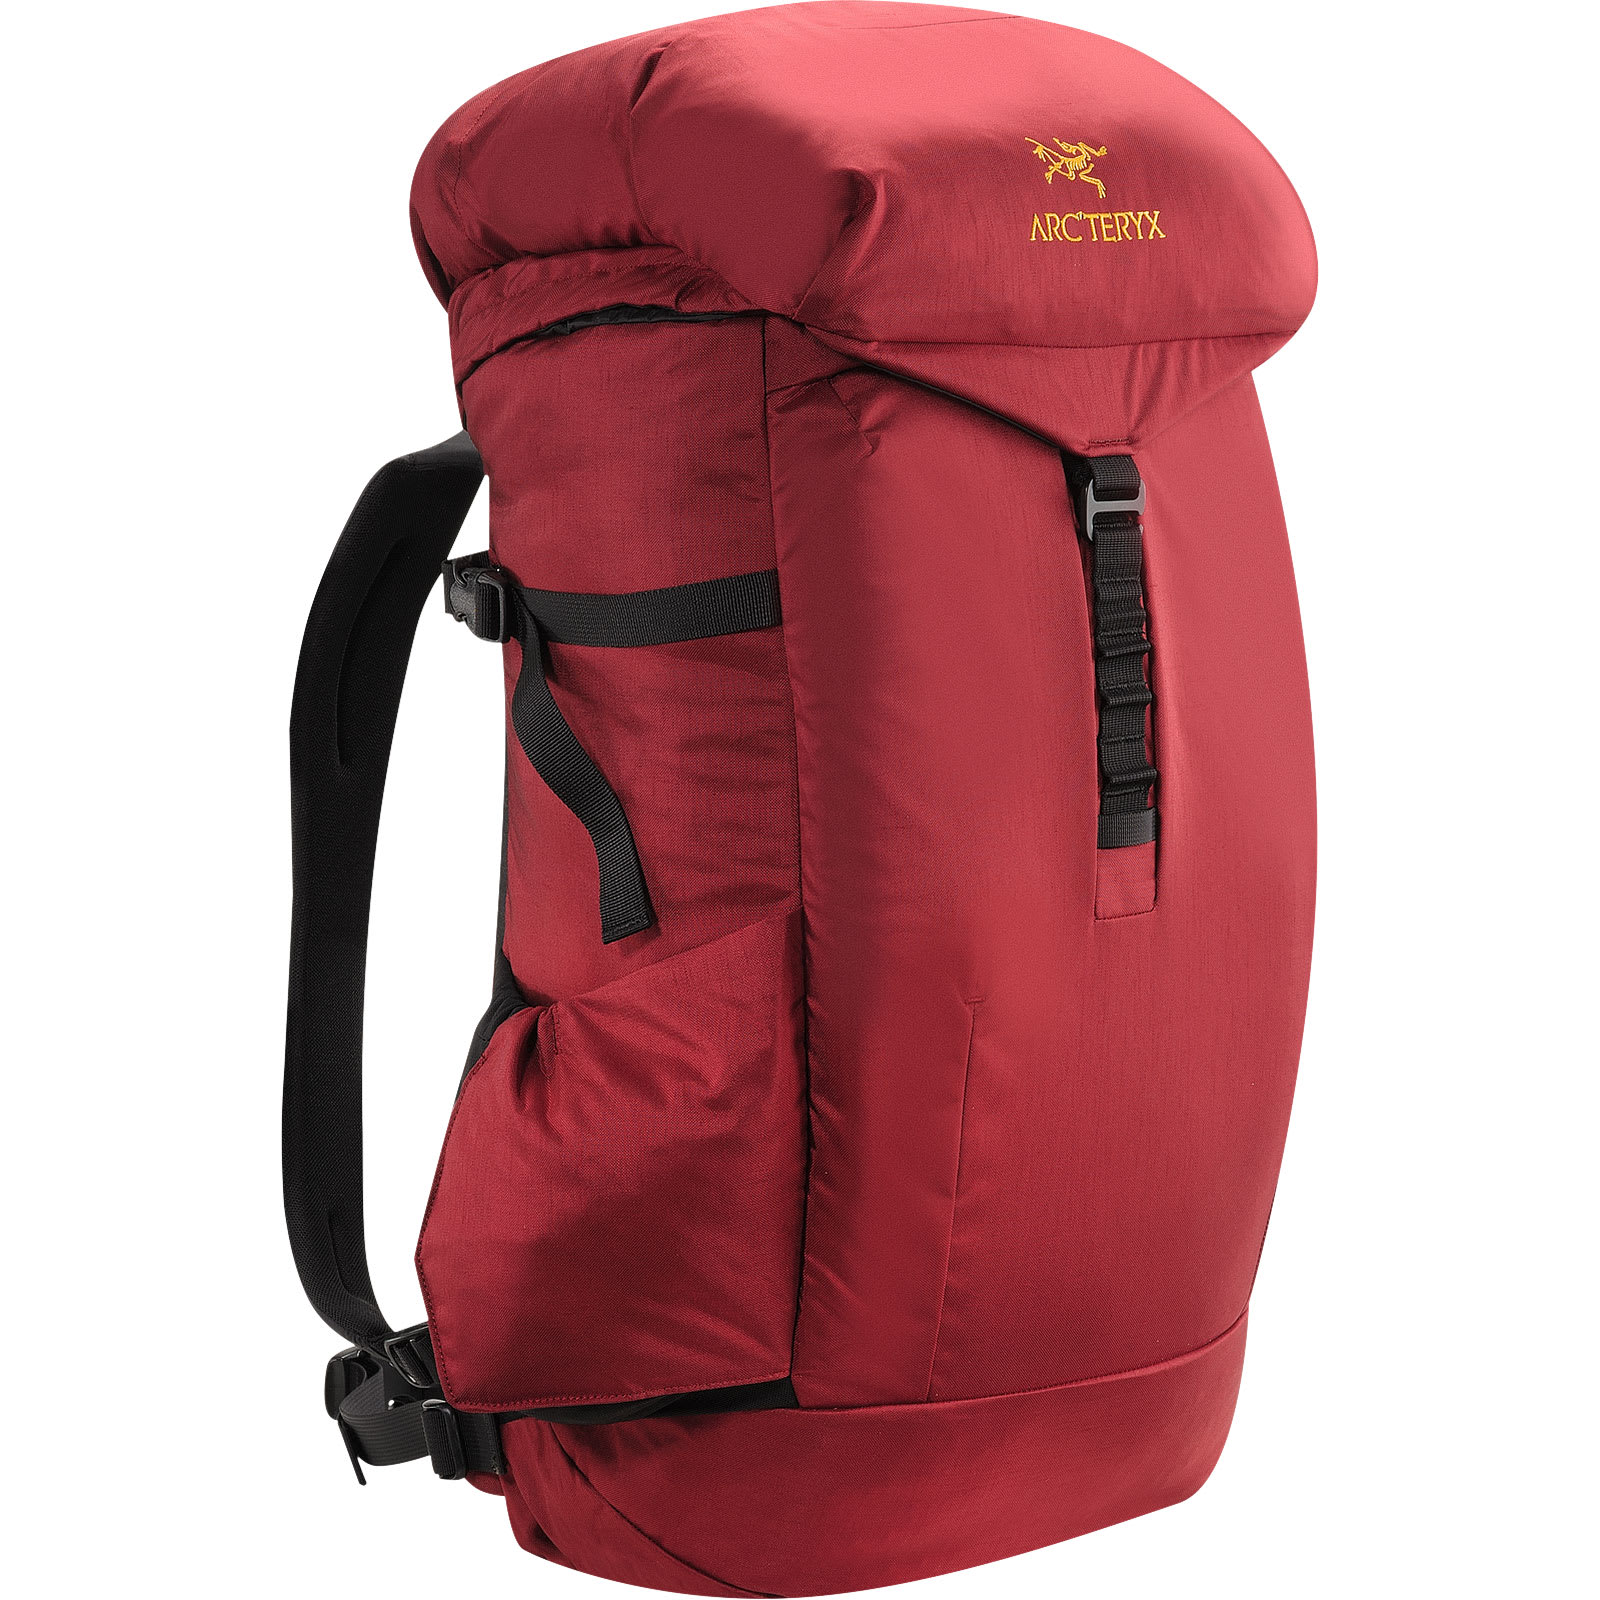 Buy Arc'teryx Jericho Backpack from Outnorth